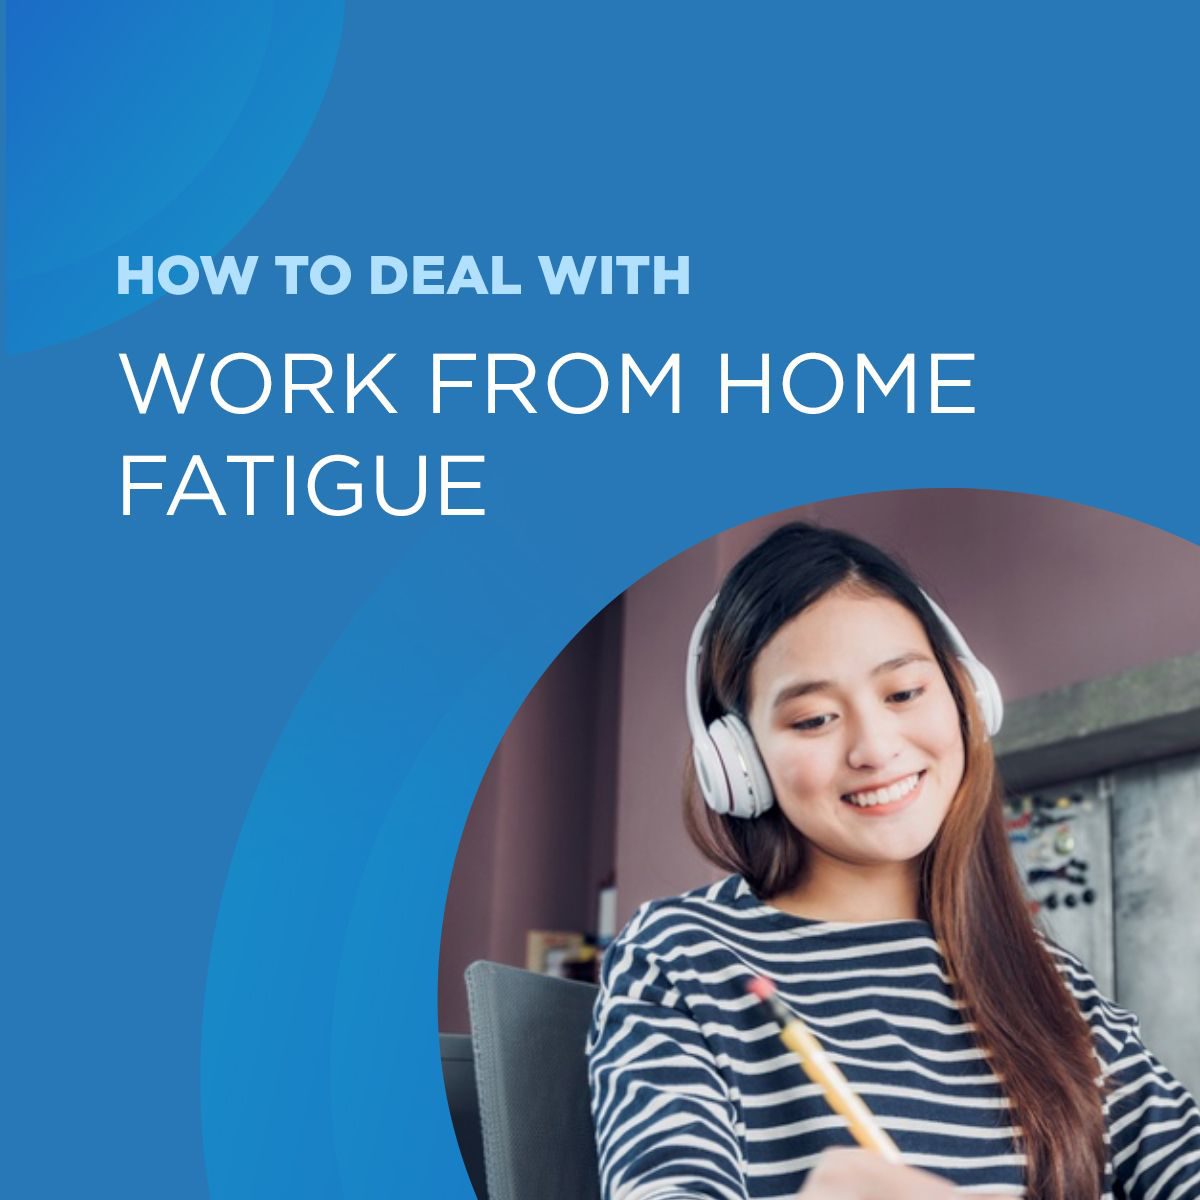 Loft’s Guide To Dealing With Work From Home Fatigue